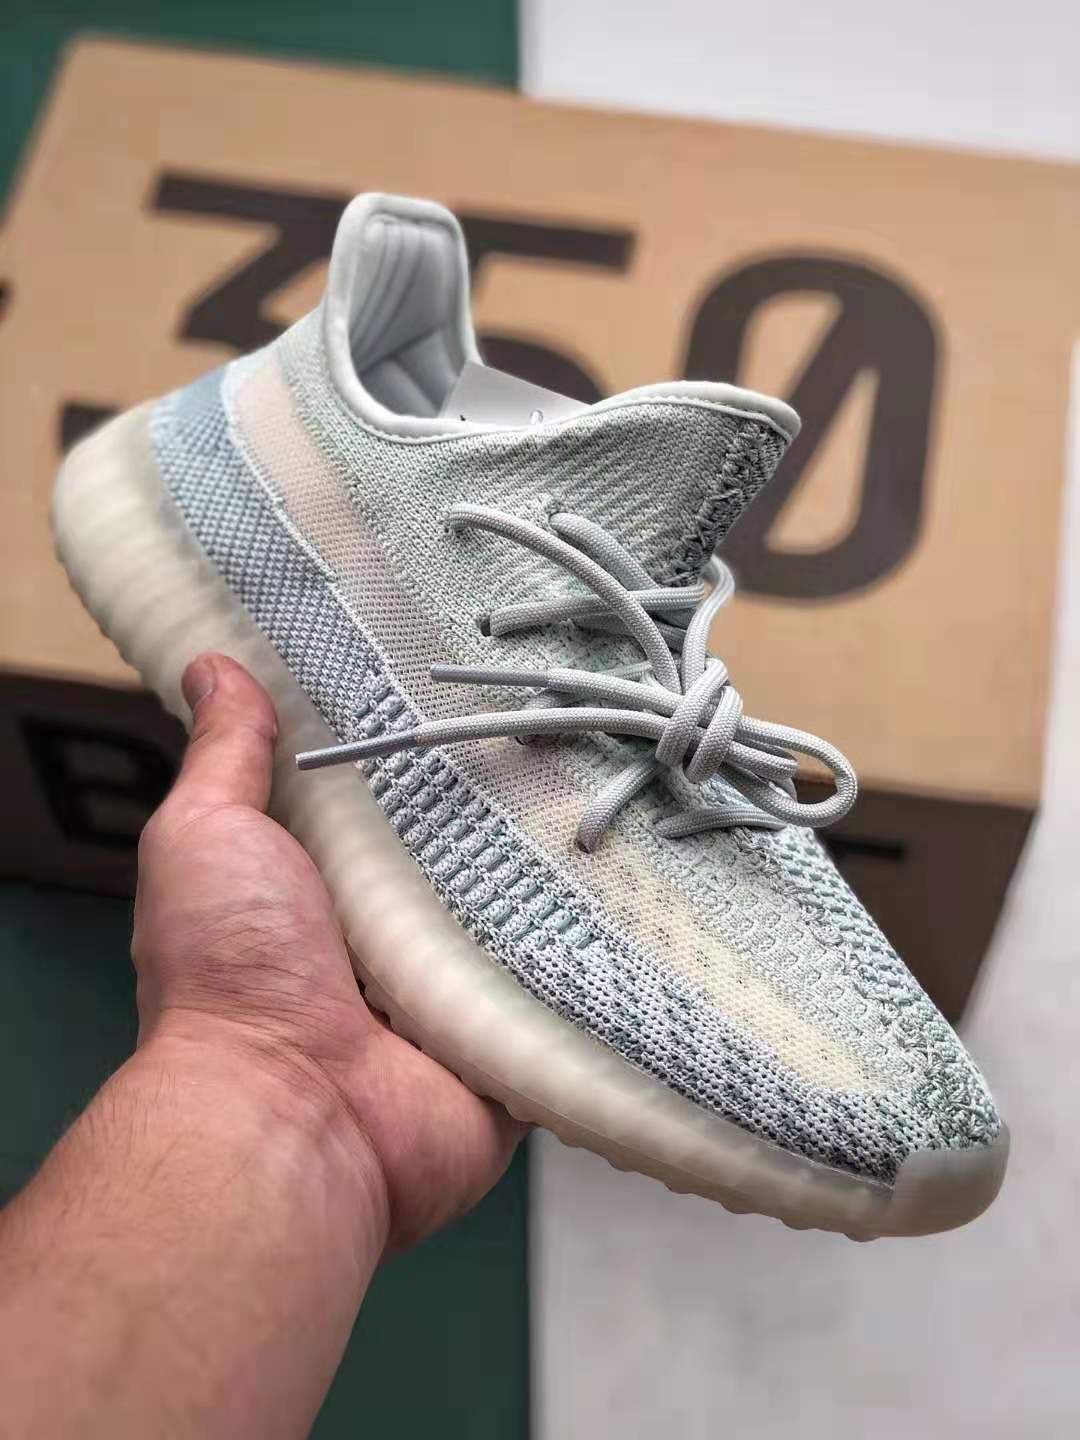 Adidas Yeezy Boost 350 V2 Cloud White Non-Reflective FW3043 – Limited Edition Sneakers